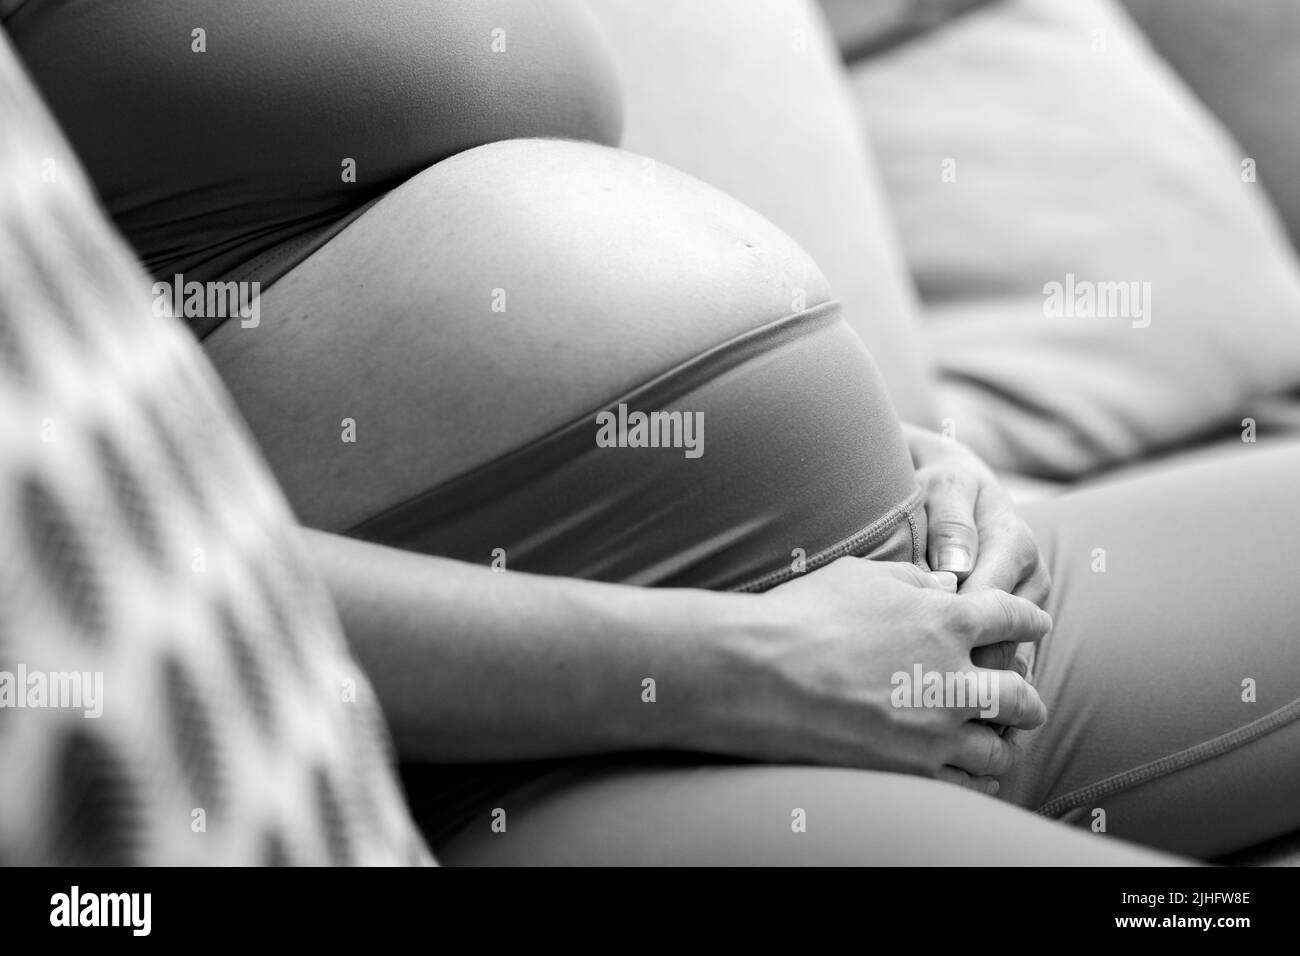 Pregnant woman belly. Pregnancy Concept. Pregnant tummy close up. Detail of pregnant woman relaxing on comfortable sofa at home in black and white. Stock Photo